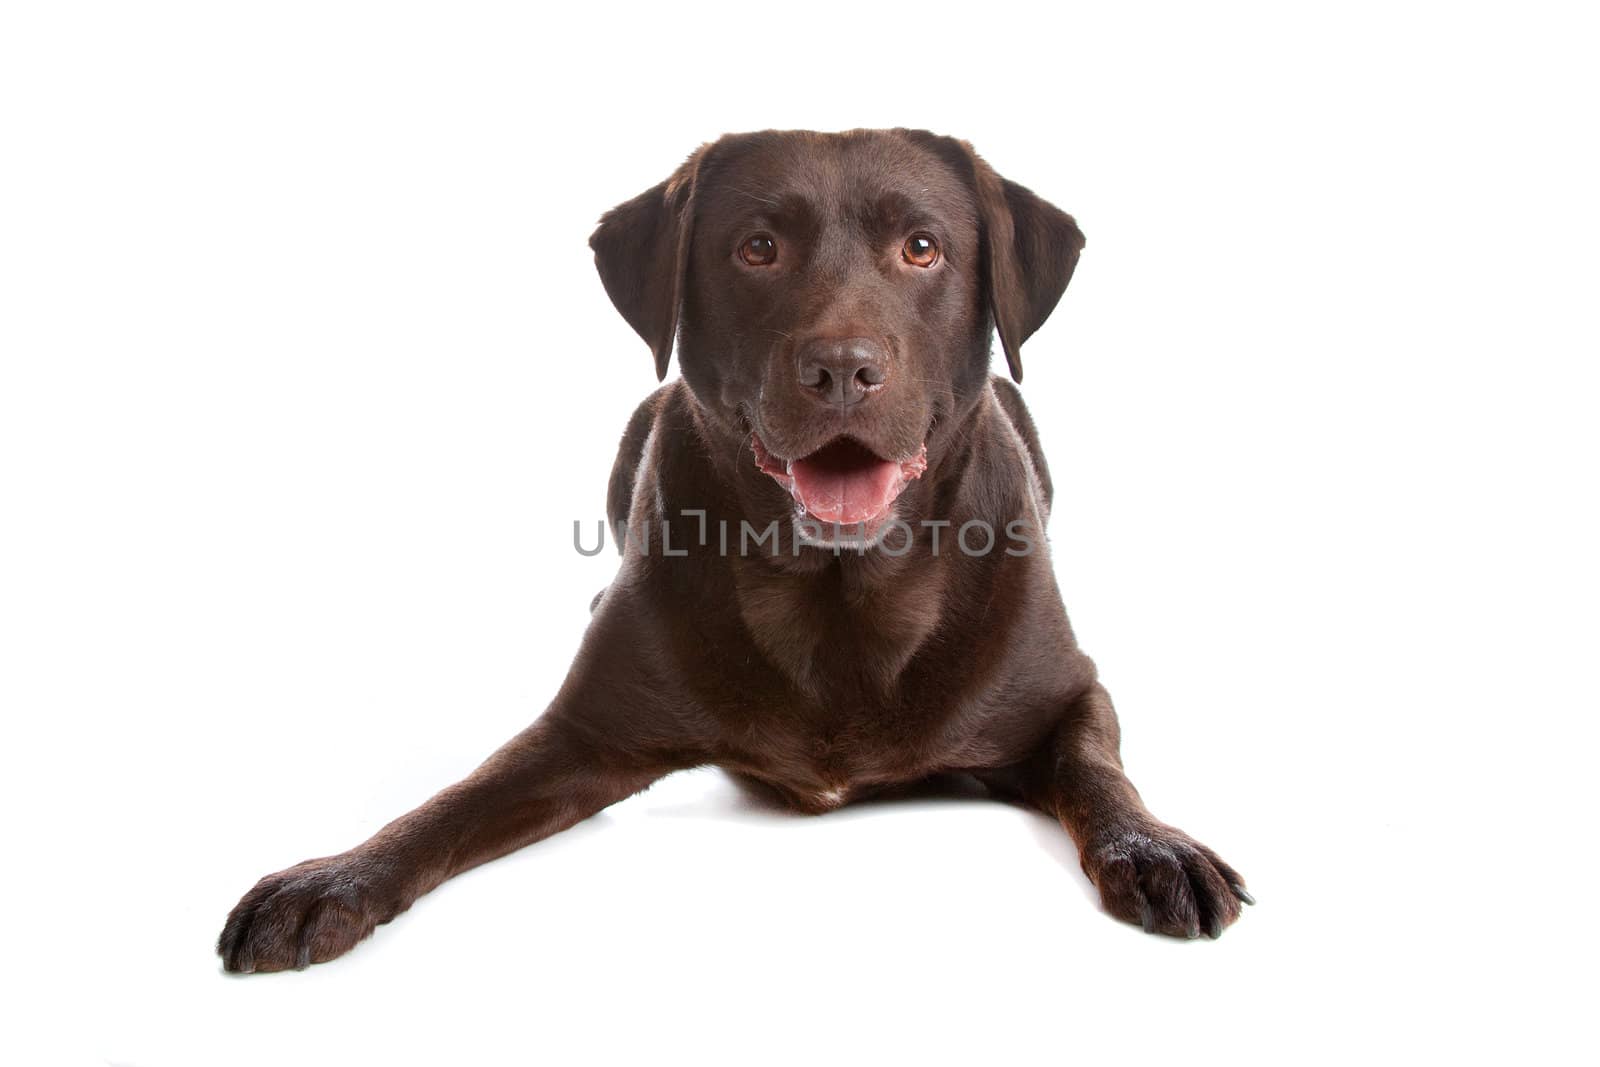 Chocolate Labrador Retriever dog lying down, isolated on a white background